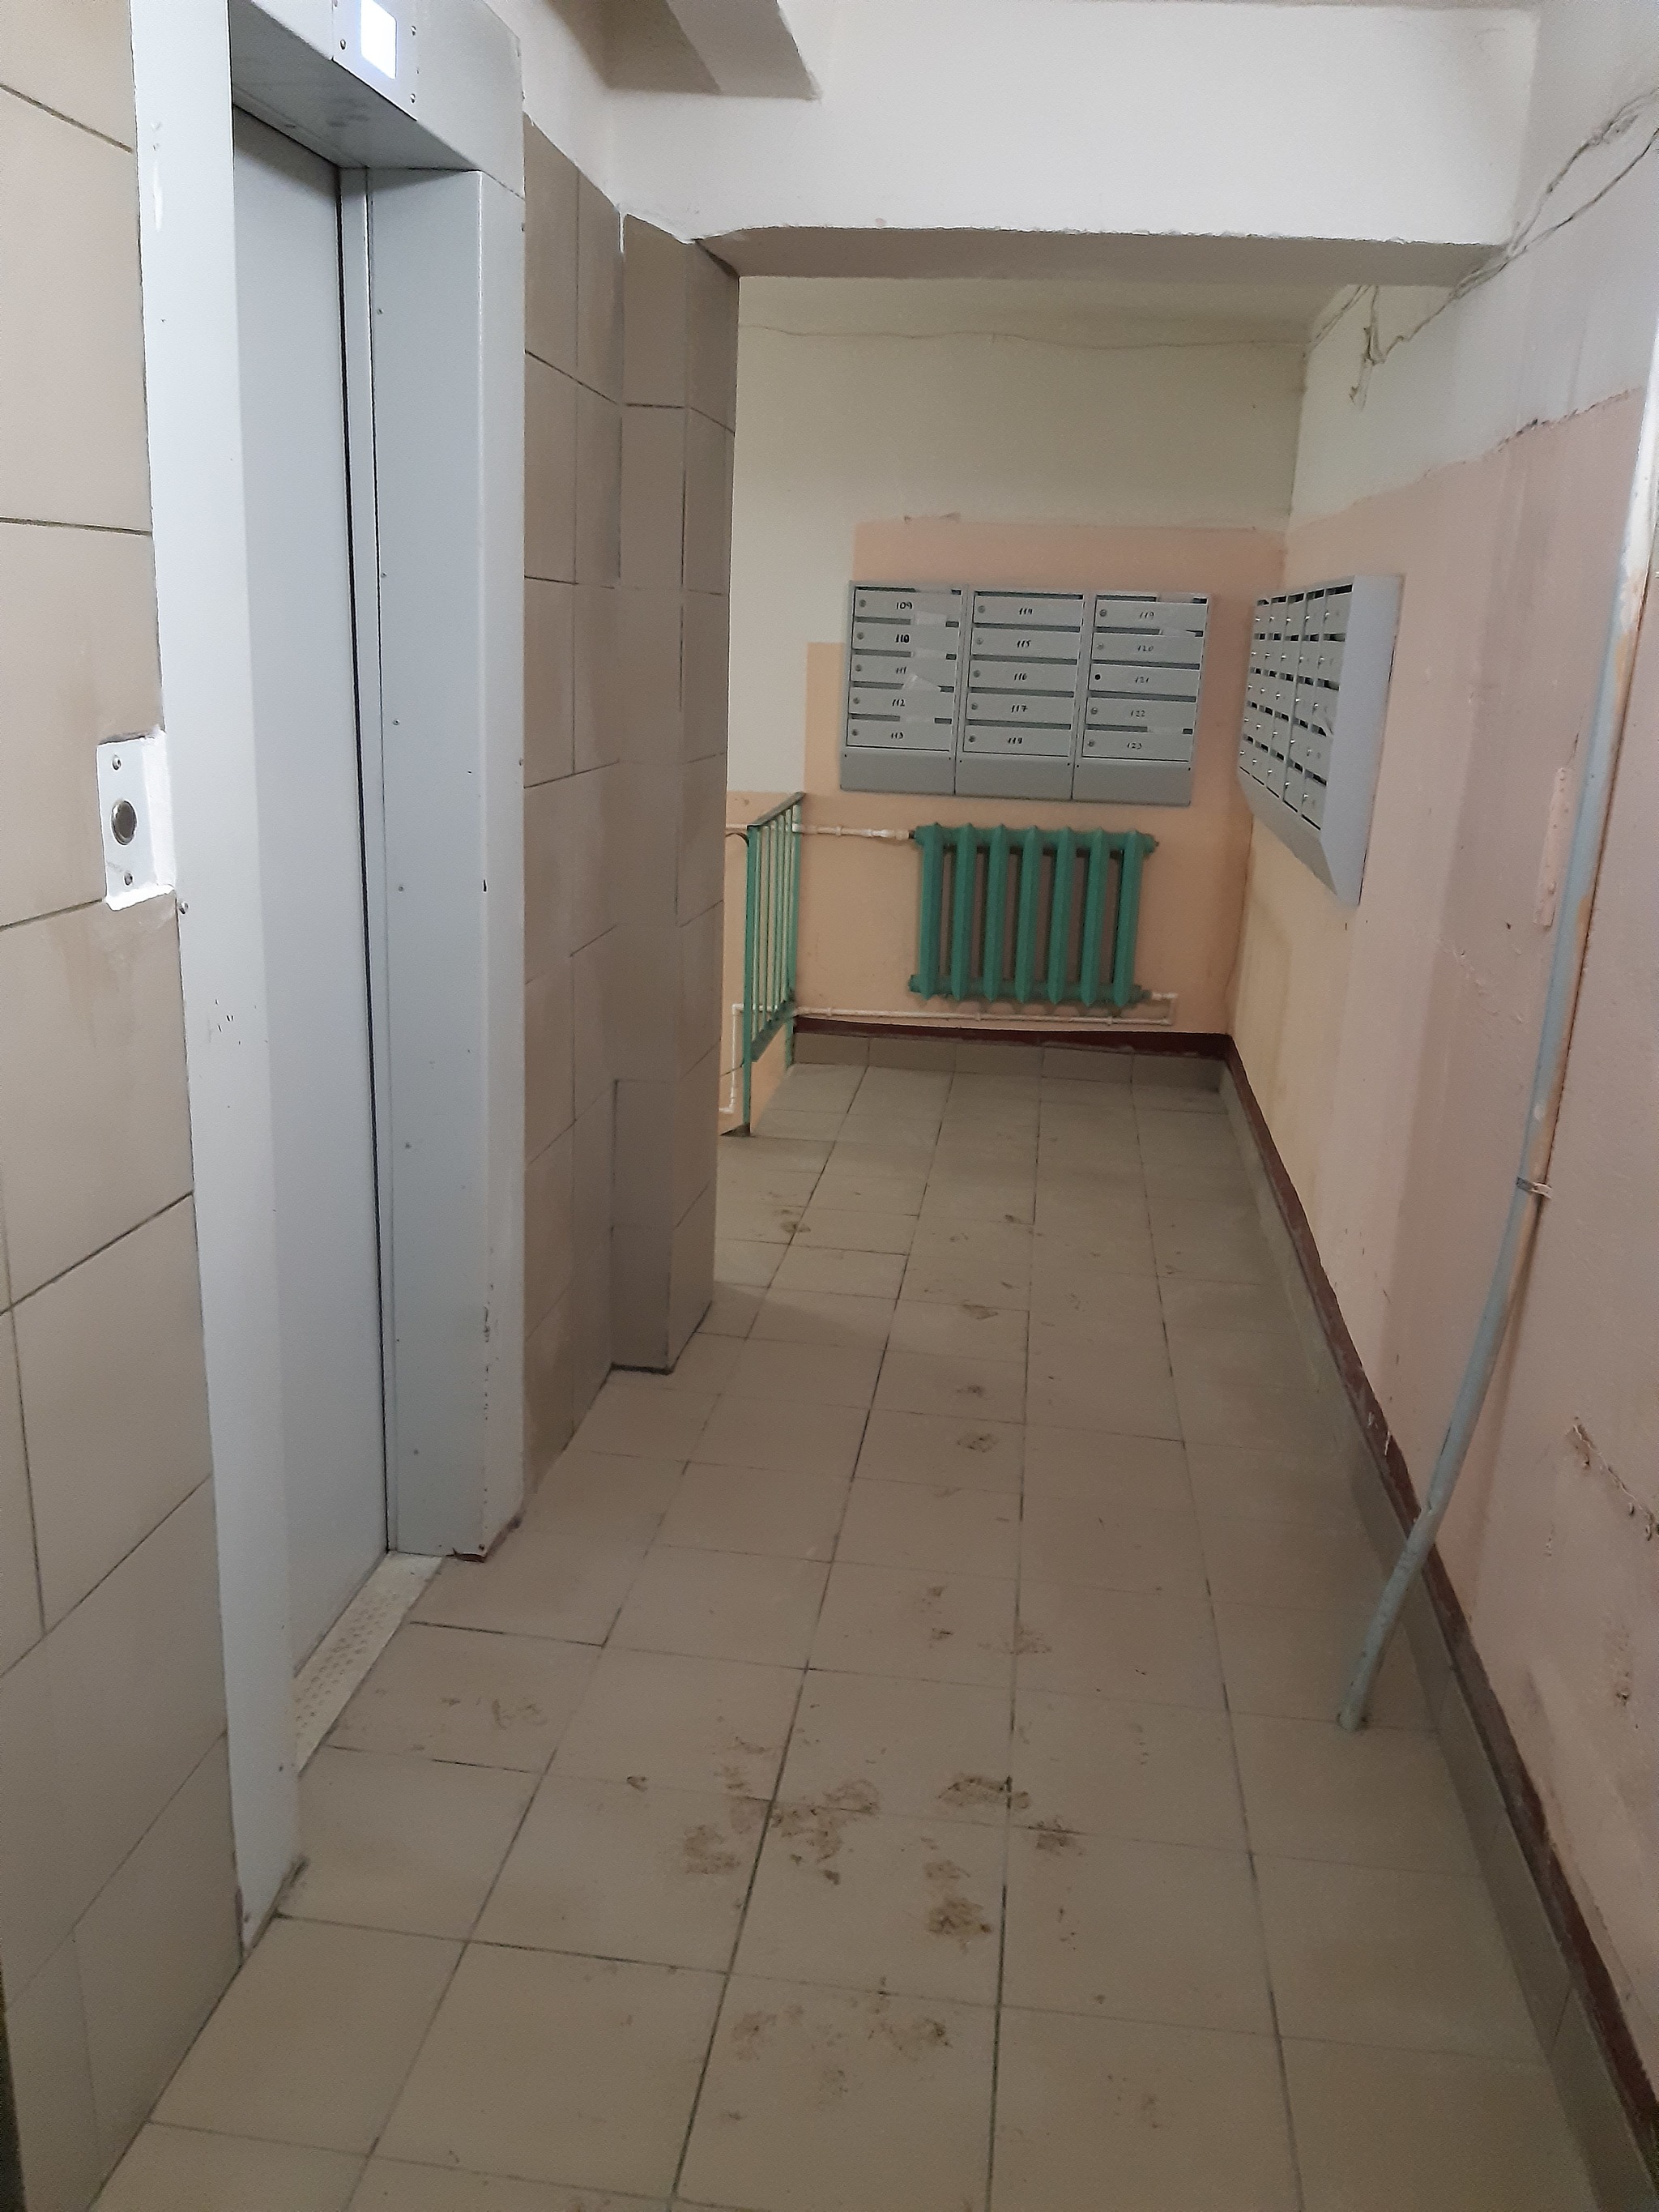 Post #7257270 - My, Entrance, Housing and communal services, Tiles on the floor, Longpost